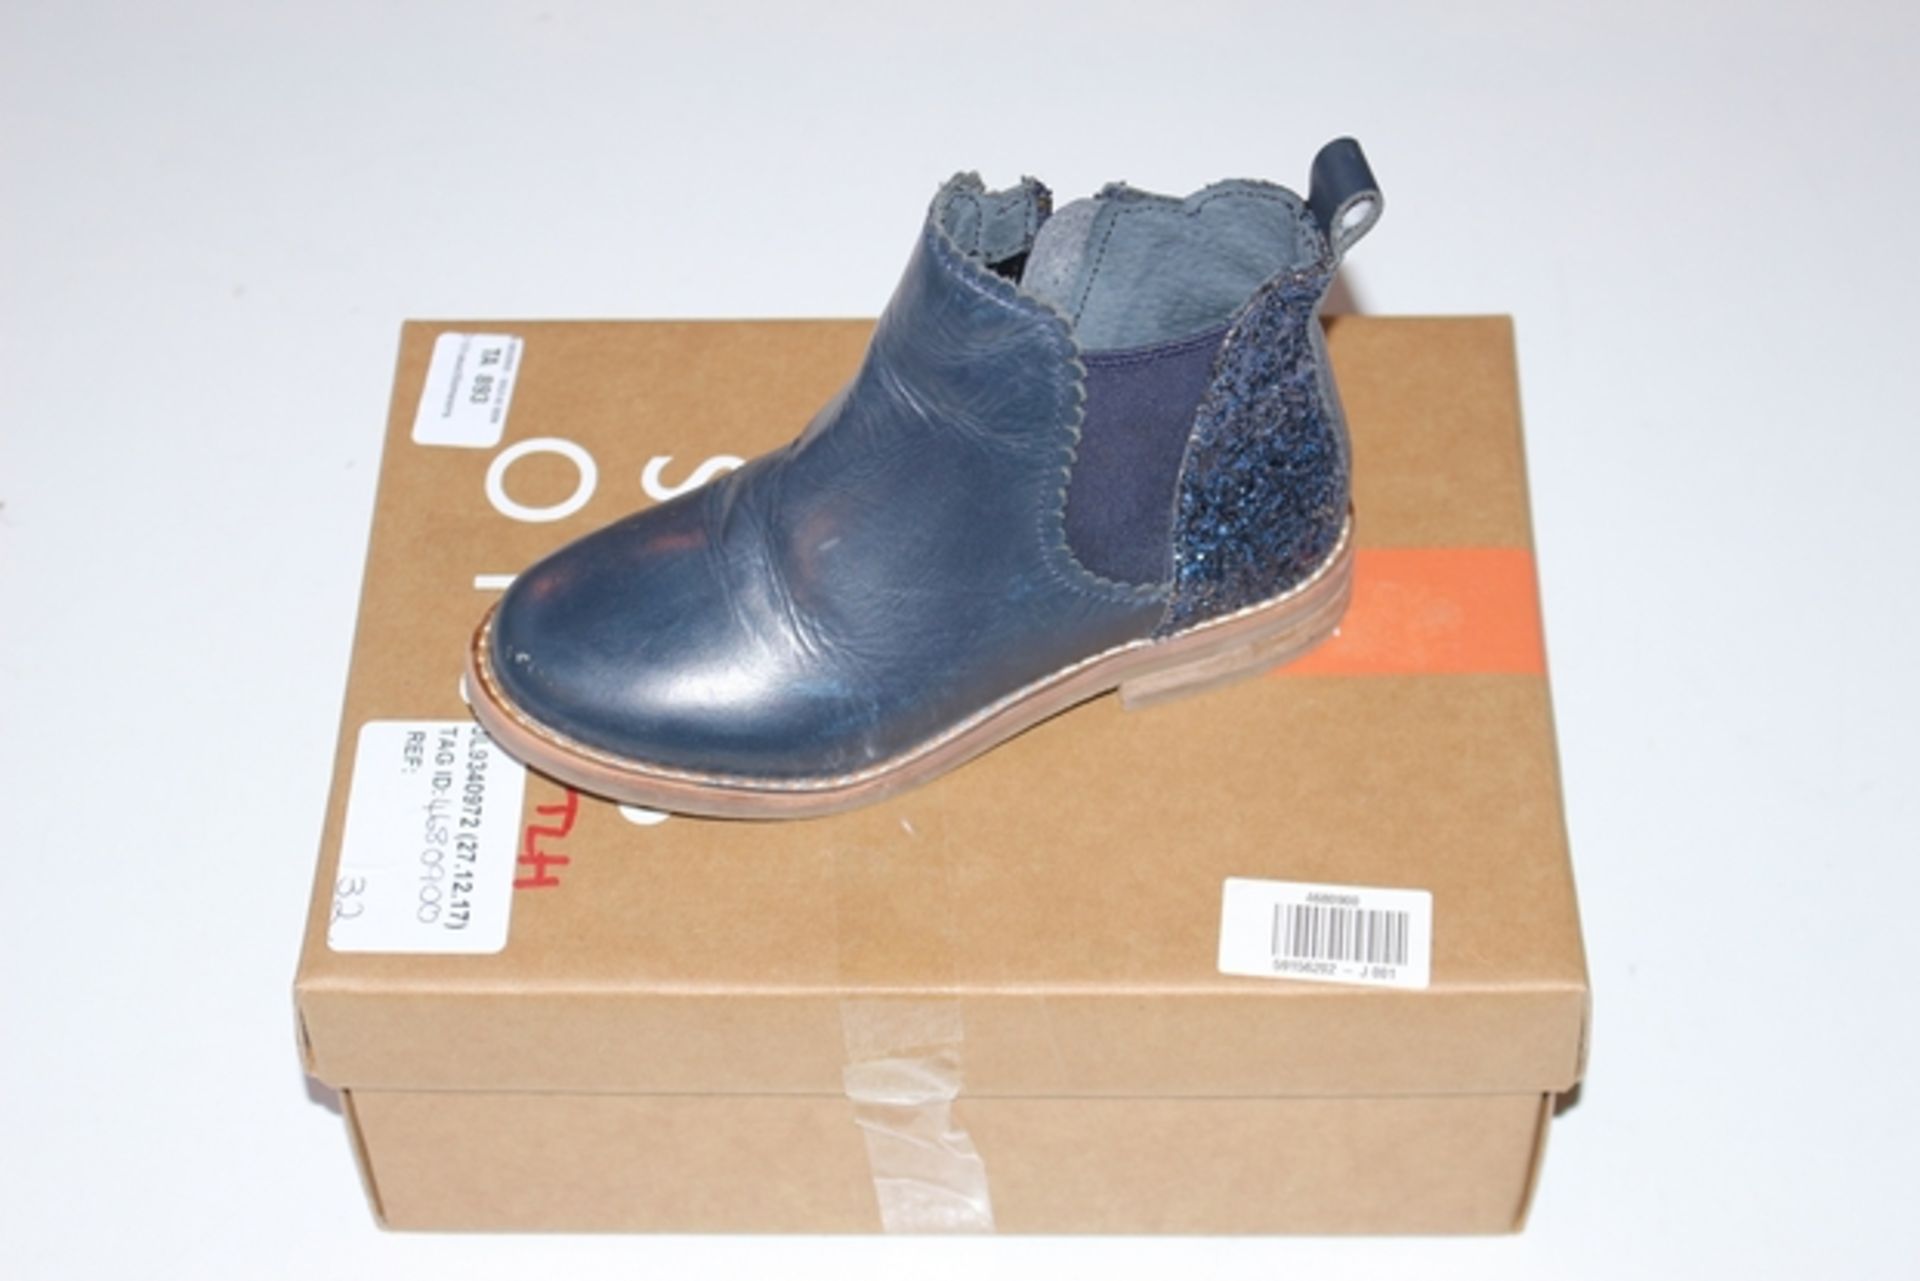 1X PAIR OF LIBBY CHILDREN'S BOOTS SIZE 11 RRP £30 (JL-9340972) (27/12/17) (4680900)